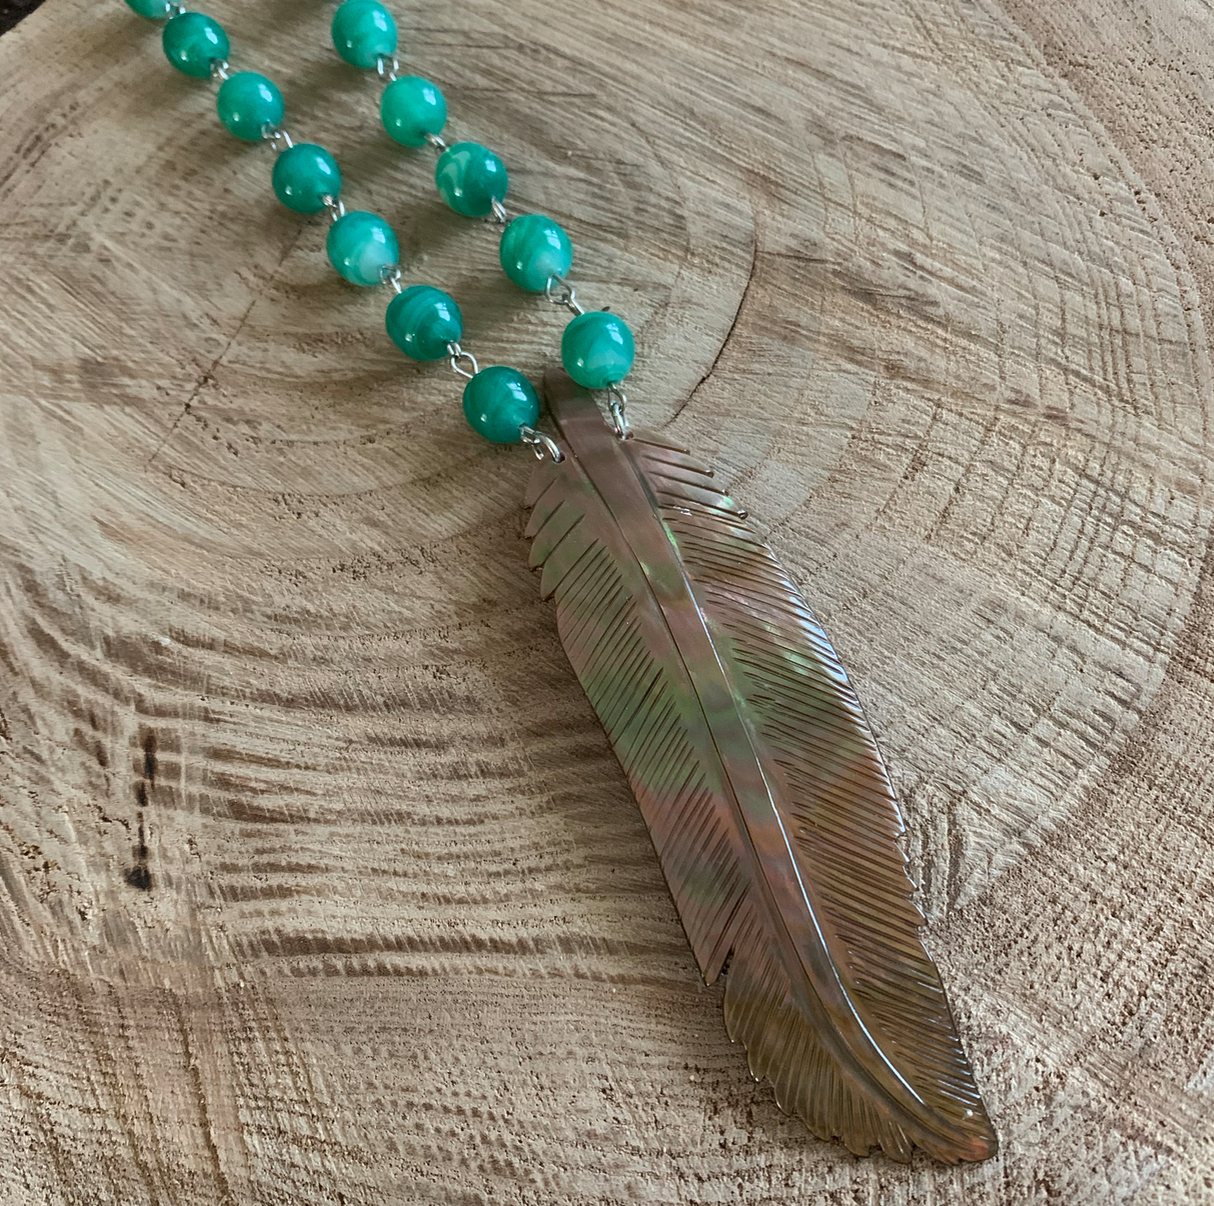 Shell Feather Fun Necklace